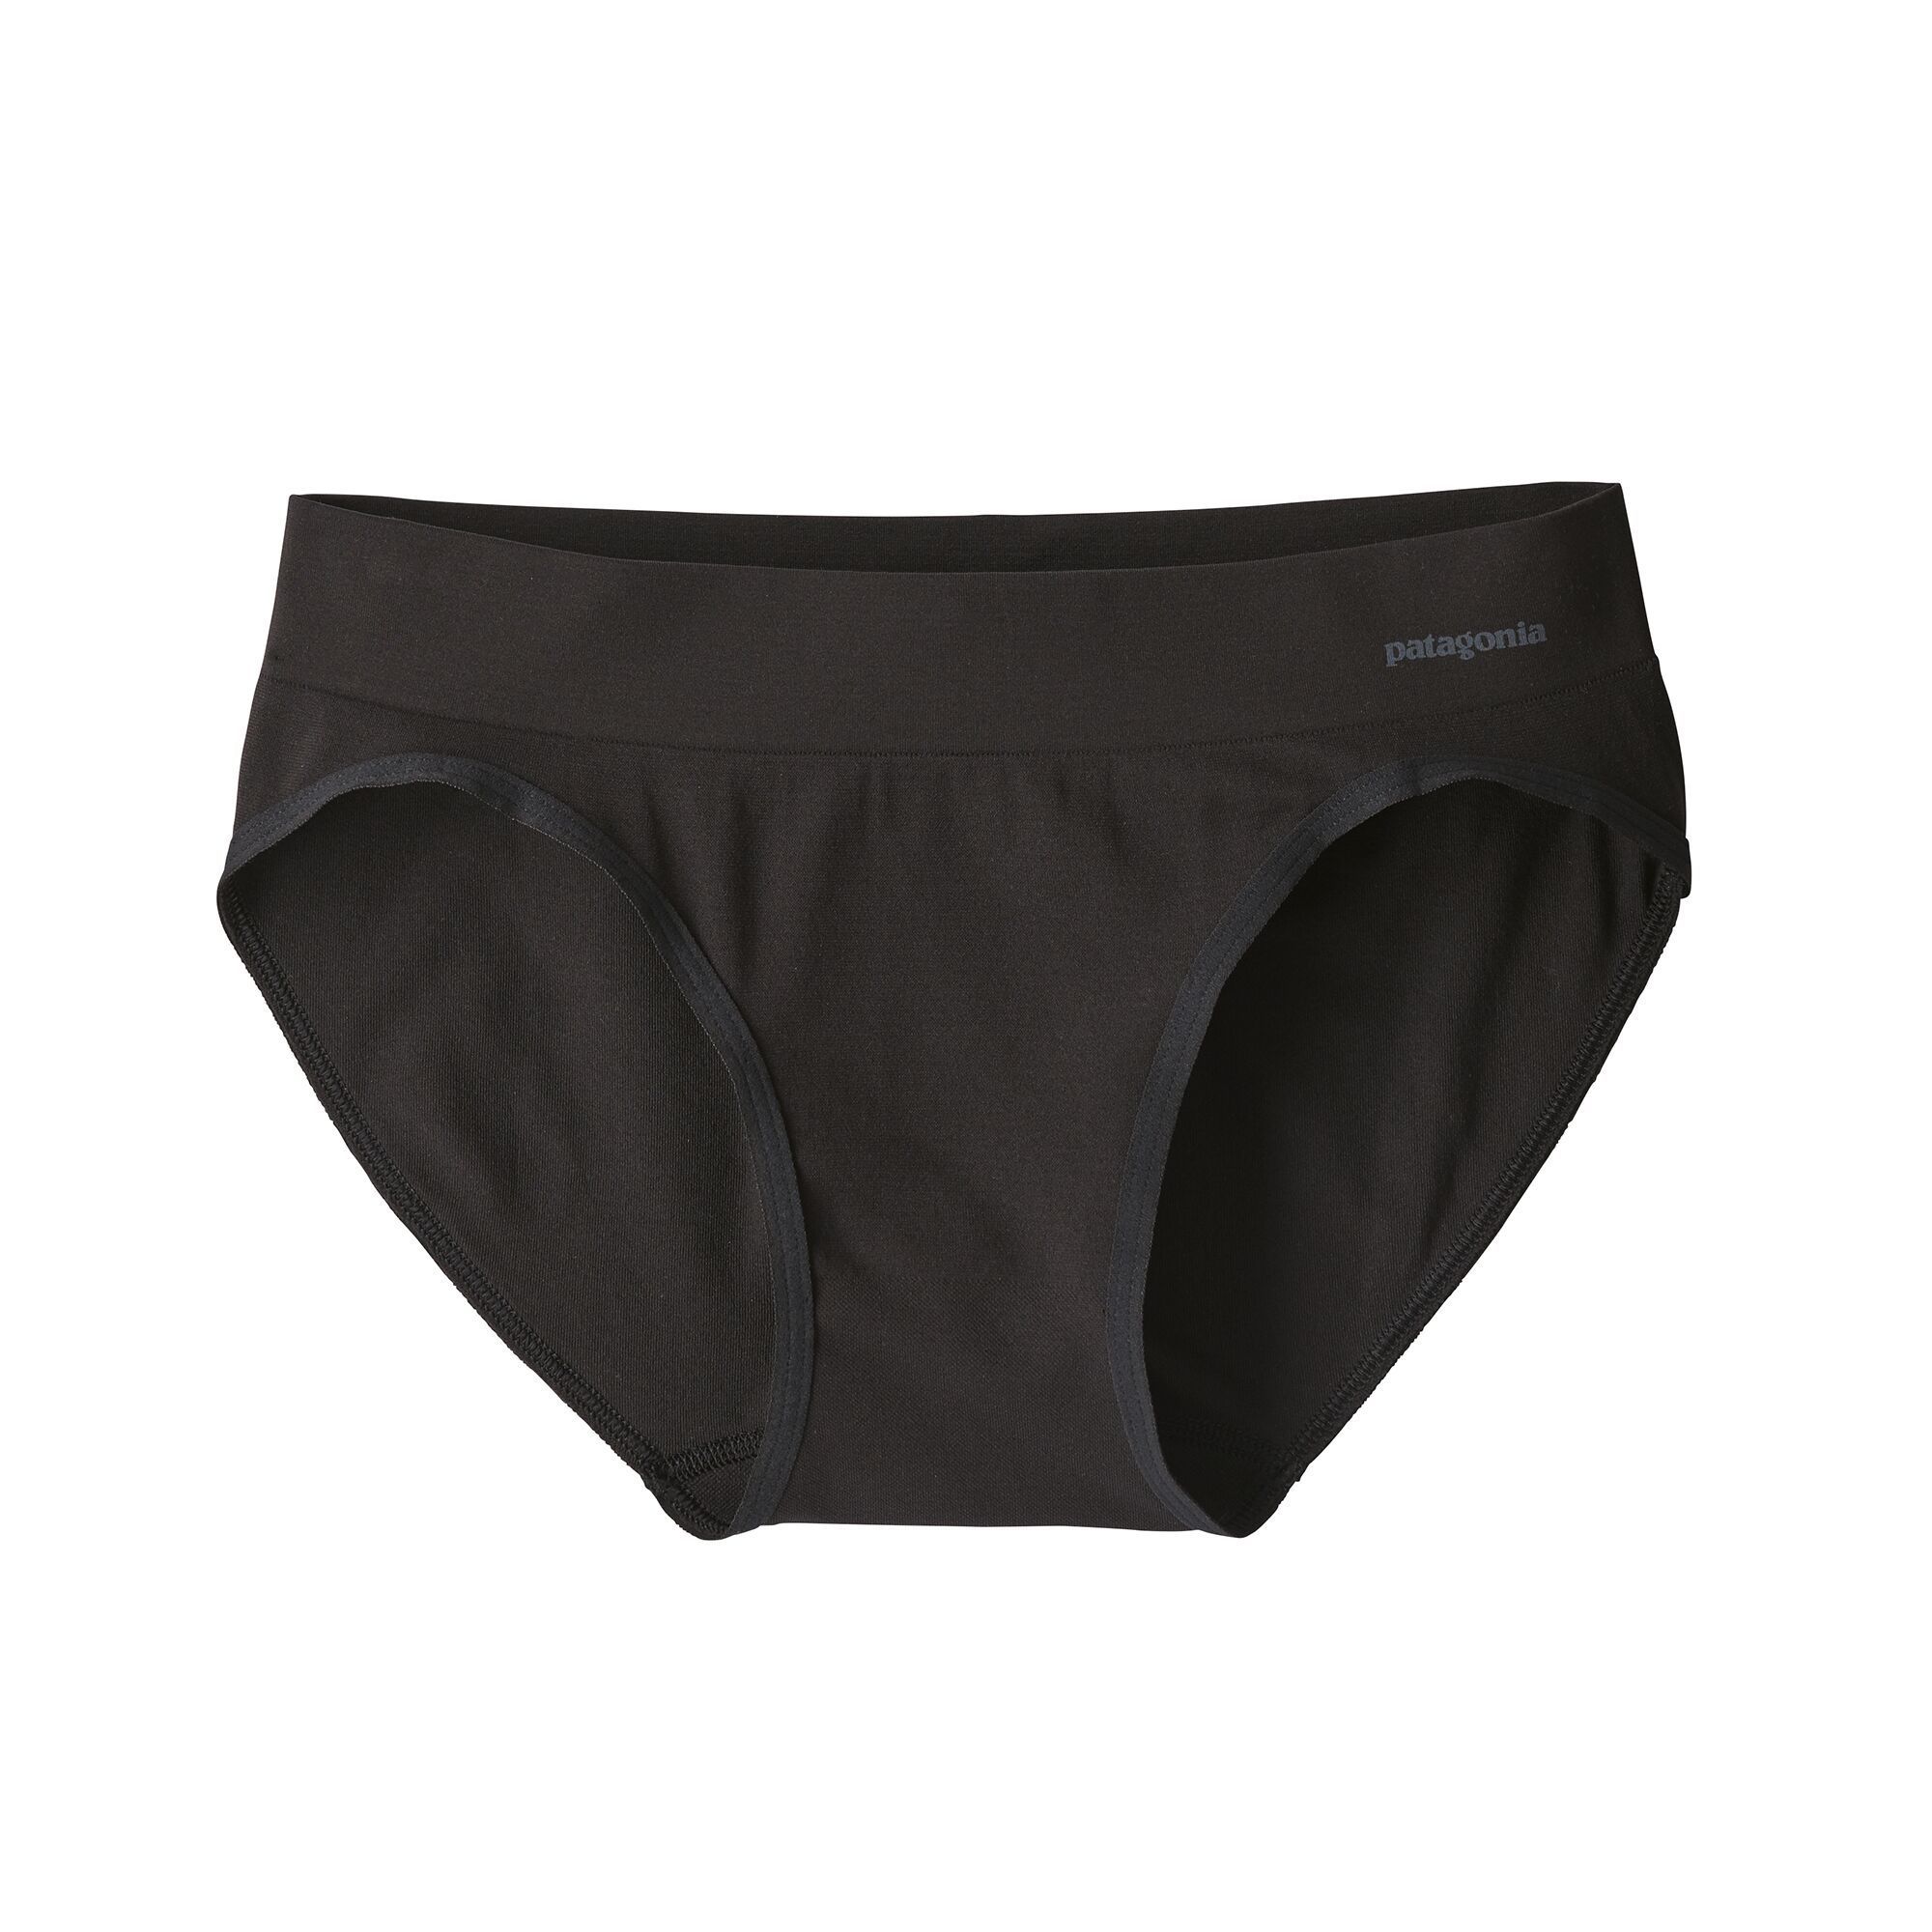 Patagonia Women's Active Briefs - Recycled Polyester, Black / S